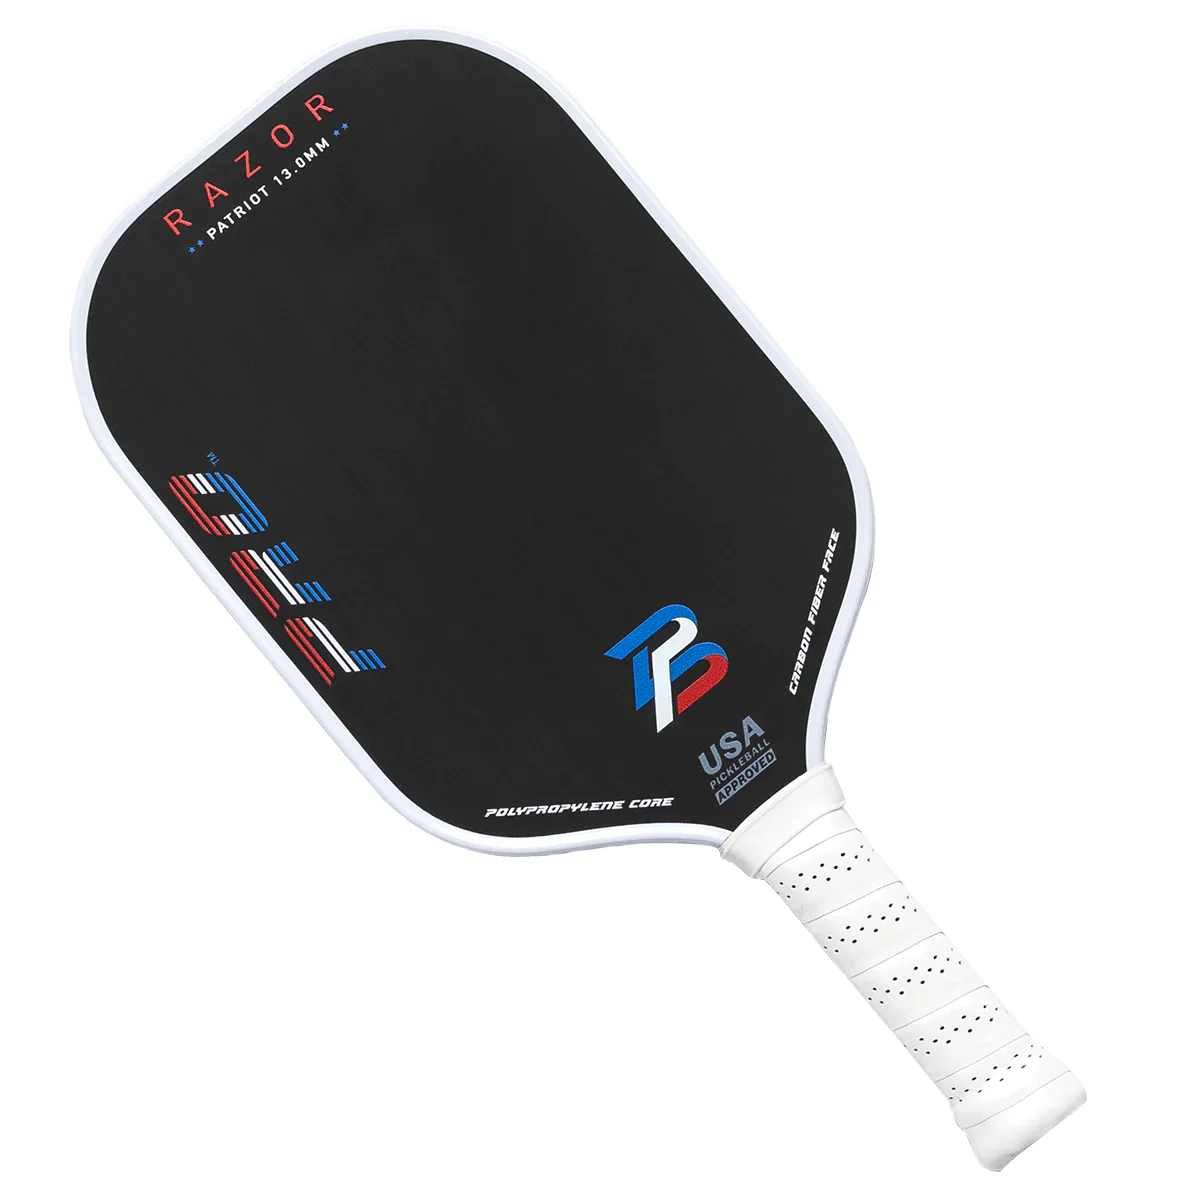 Best Pro Pickleball Paddles for Advance Play (Hint its PB Pro Patriot T700 Carbon Fire)